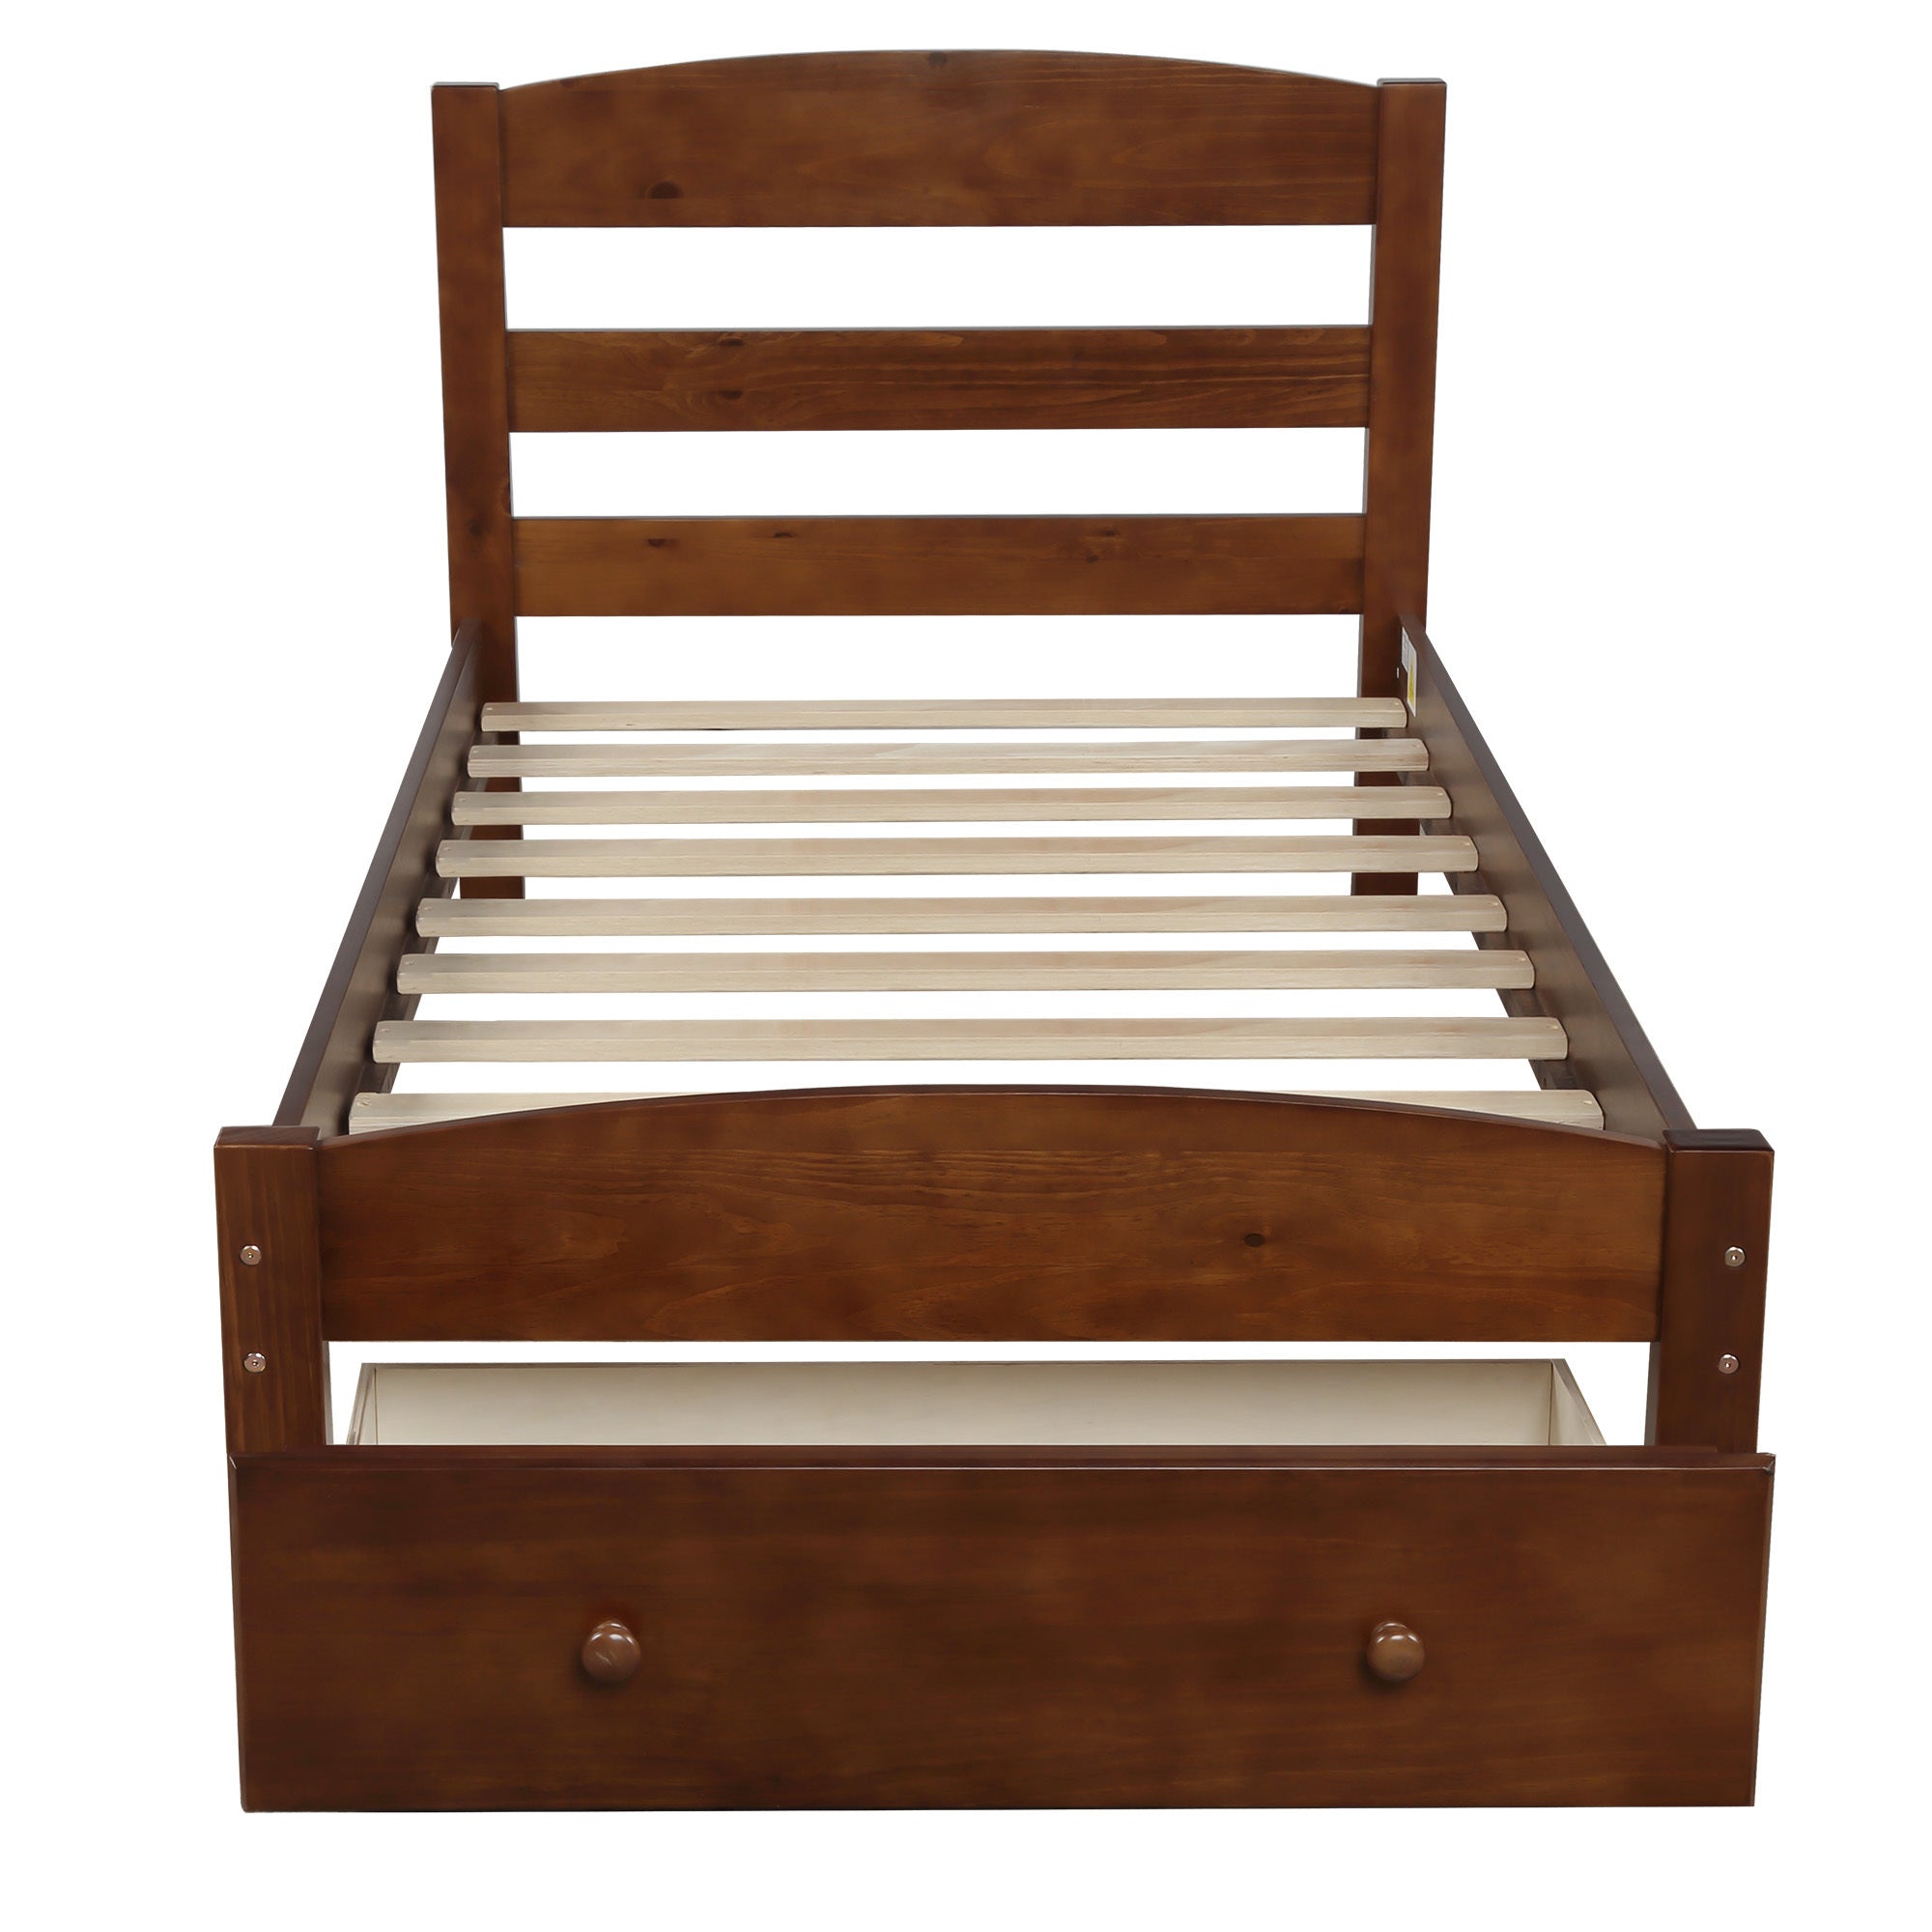 Walnut Twin Platform Bed Frame with Storage Drawer - Wood Slat Support, No Box Spring Required